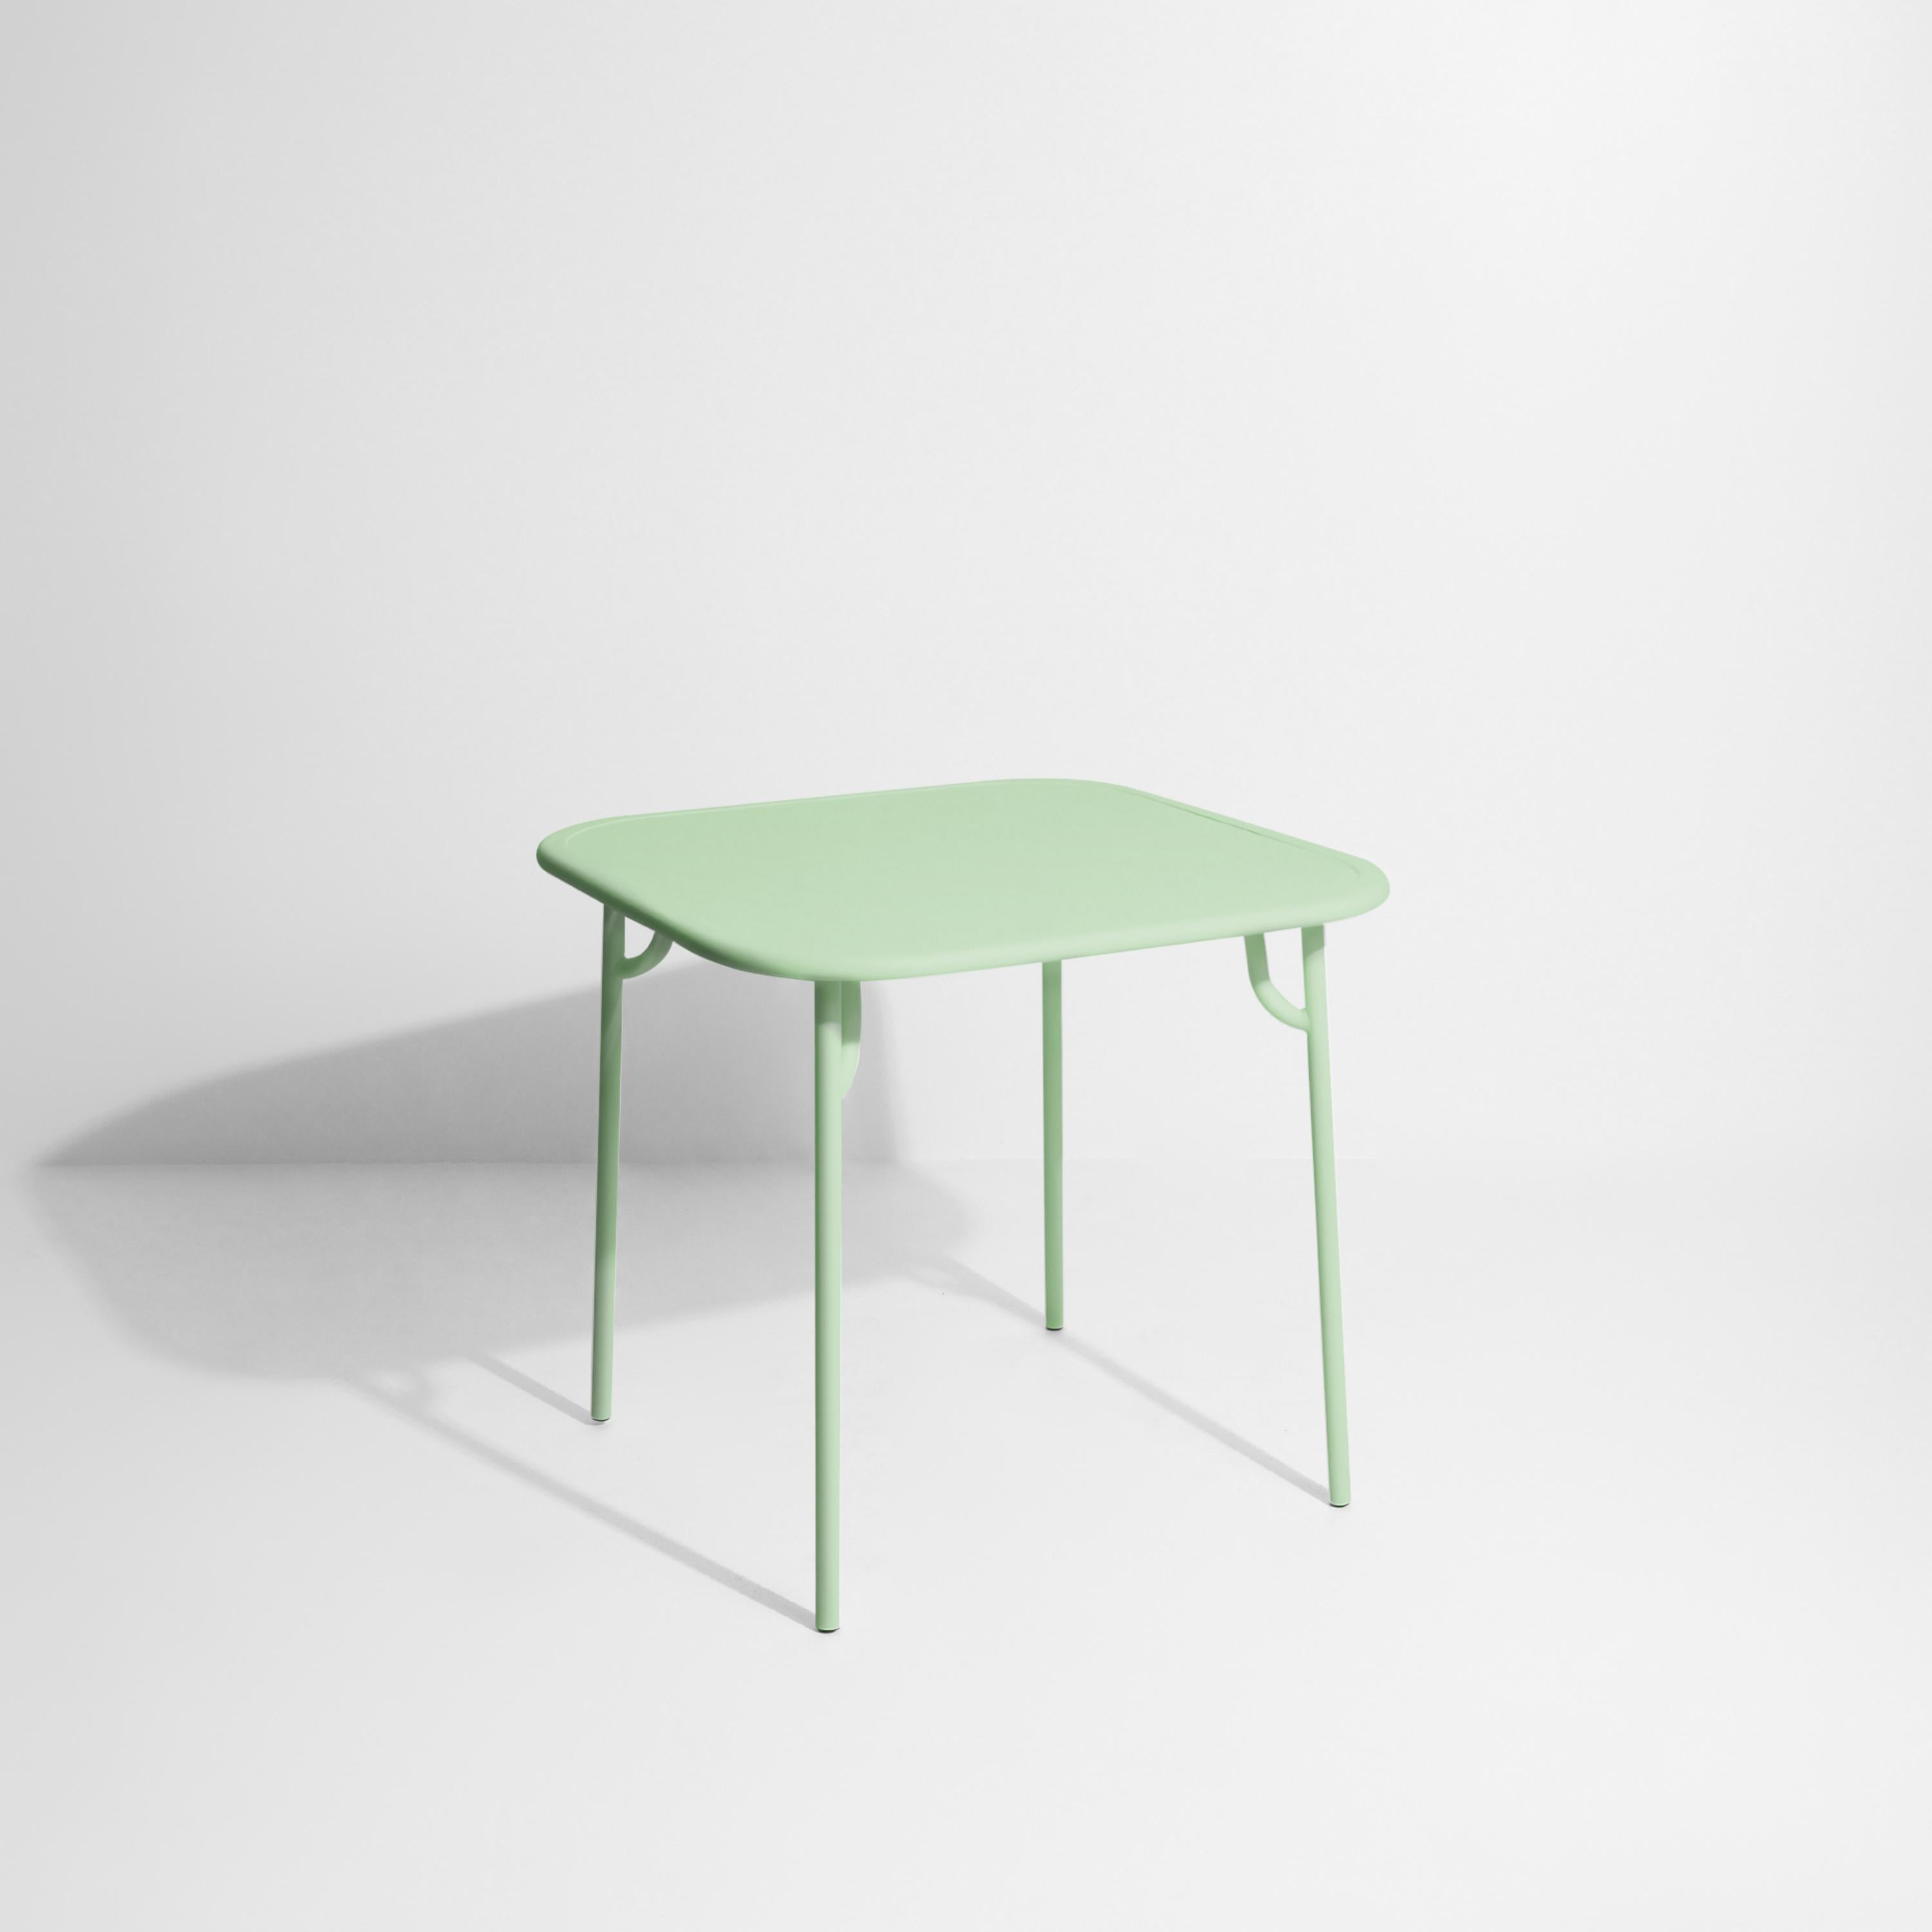 Petite Friture Week-End Plain Square Dining Table in Pastel Green Aluminium by Studio BrichetZiegler, 2017

The week-end collection is a full range of outdoor furniture, in aluminium grained epoxy paint, matt finish, that includes 18 functions and